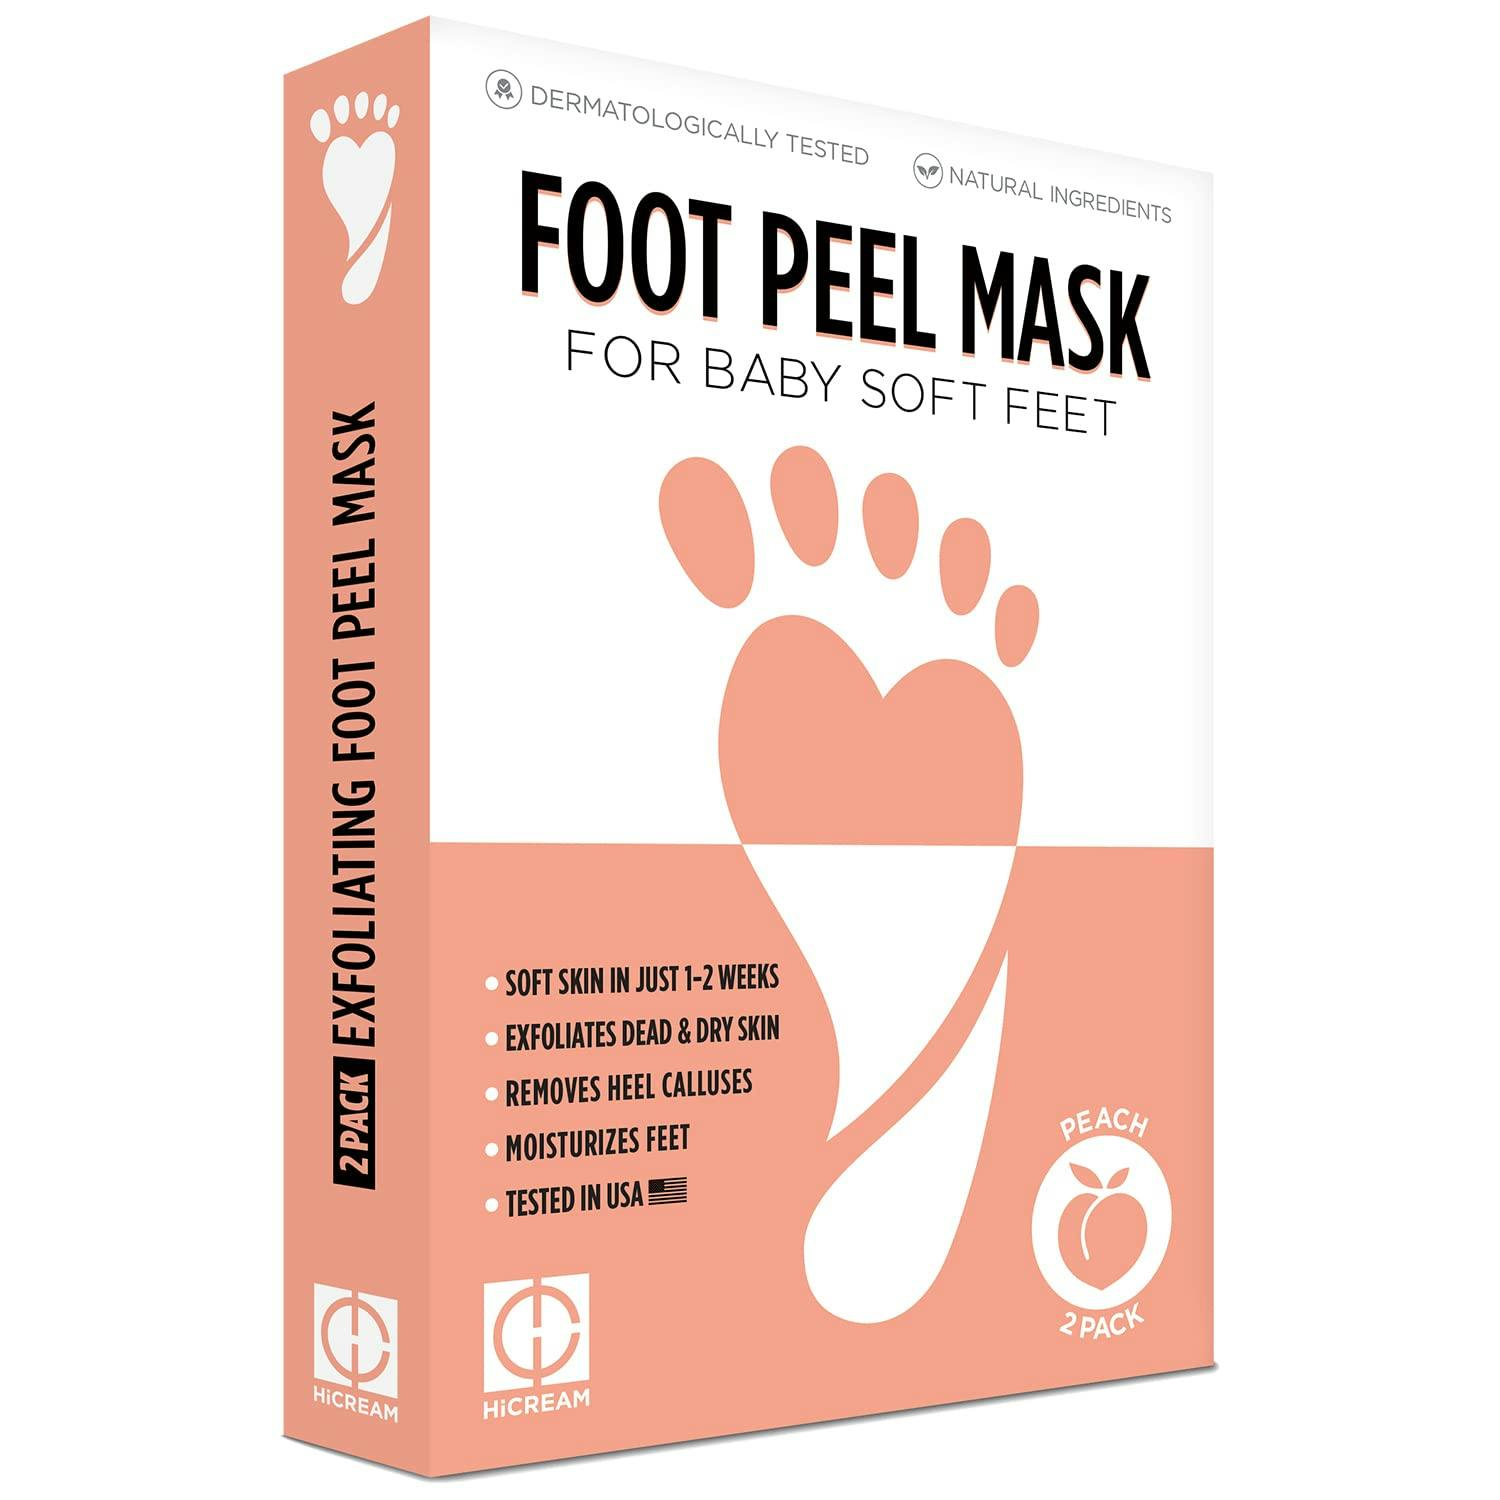 A box of foot peel masks on a white background.